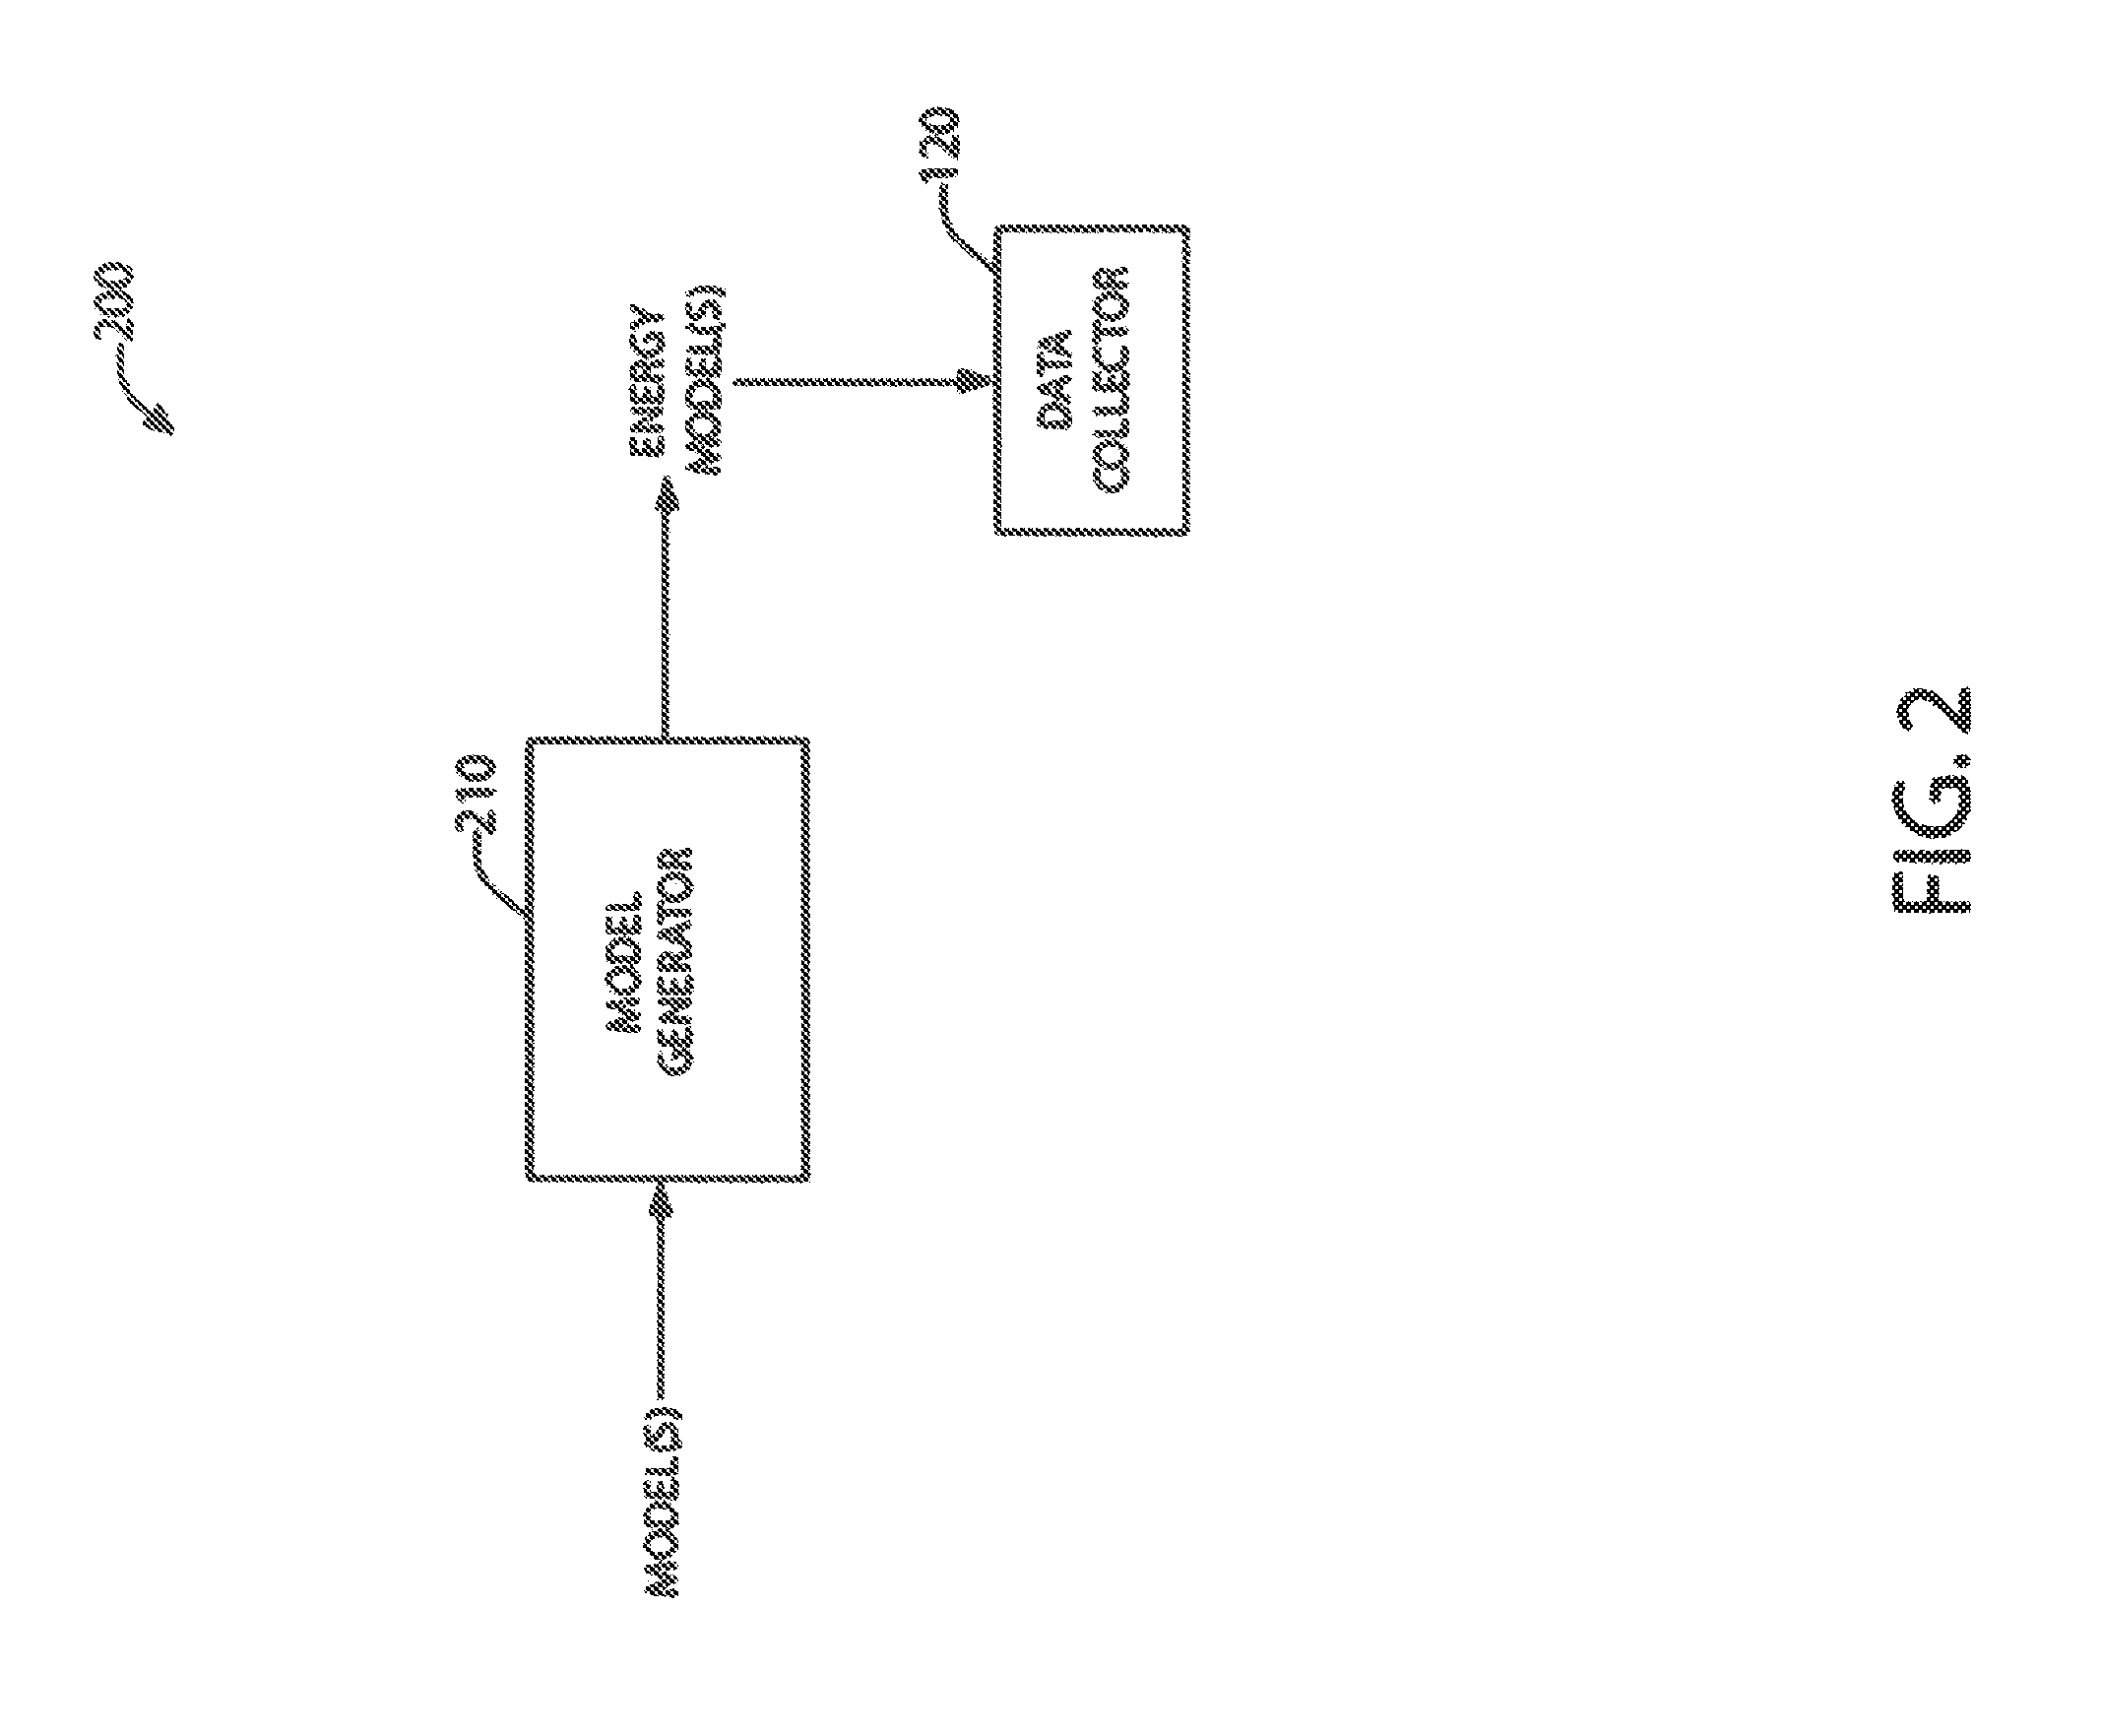 Method and system for timetable optimization utilizing energy consumption factors